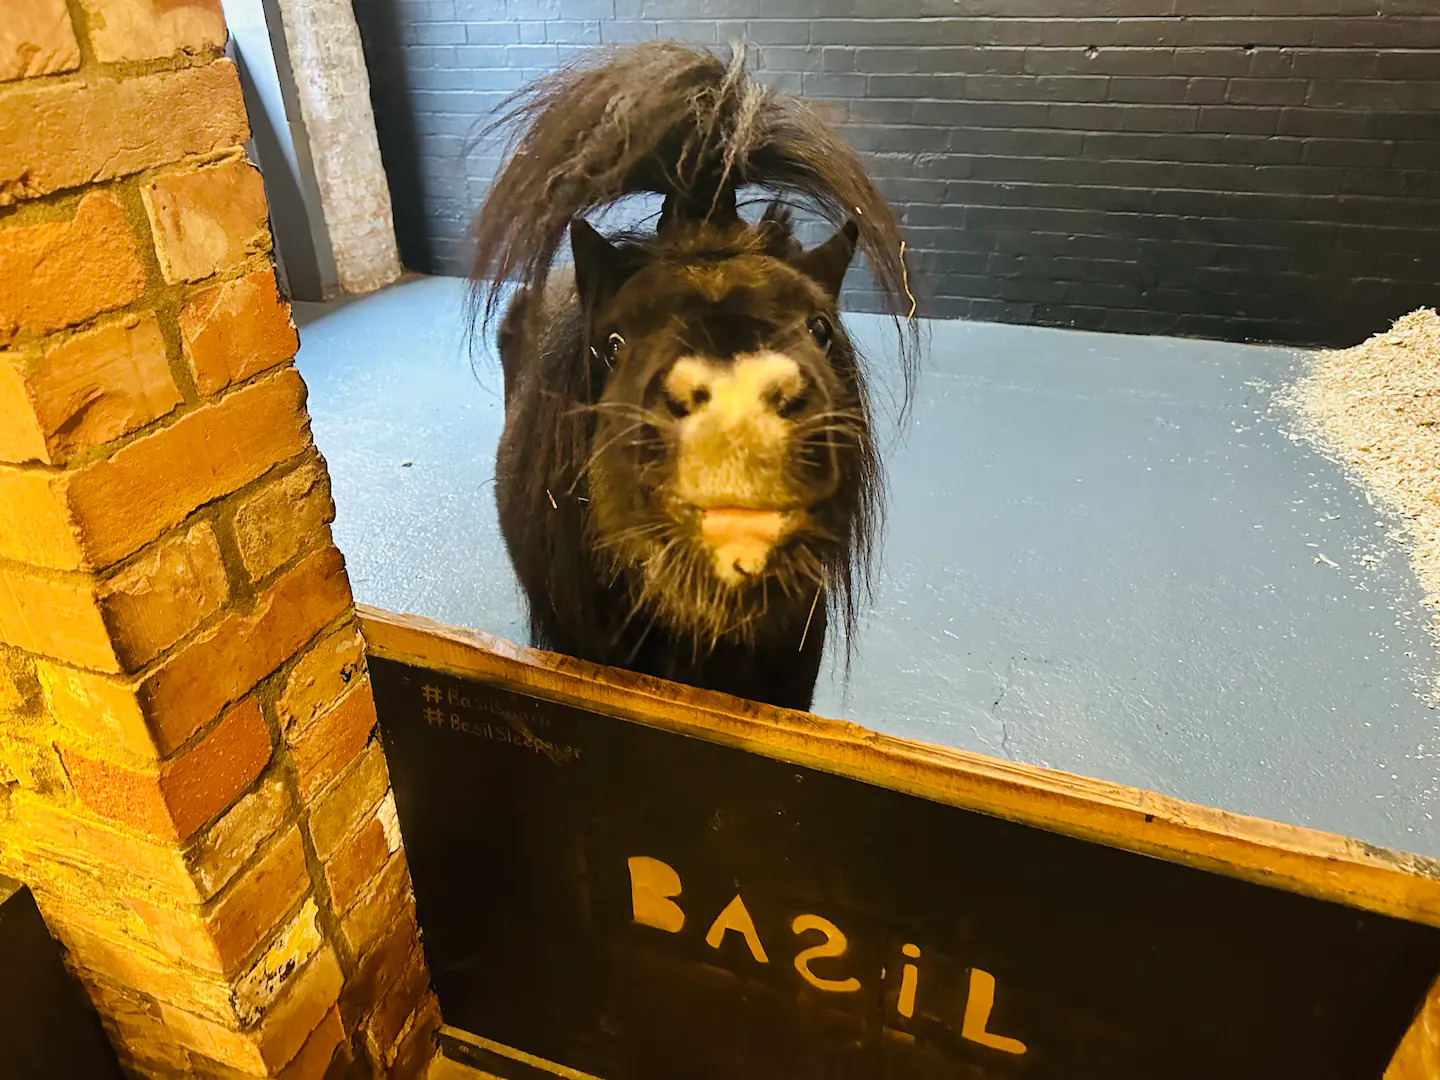 Basil the Shetland Pony shares an entrance to an Airbnb in the UK